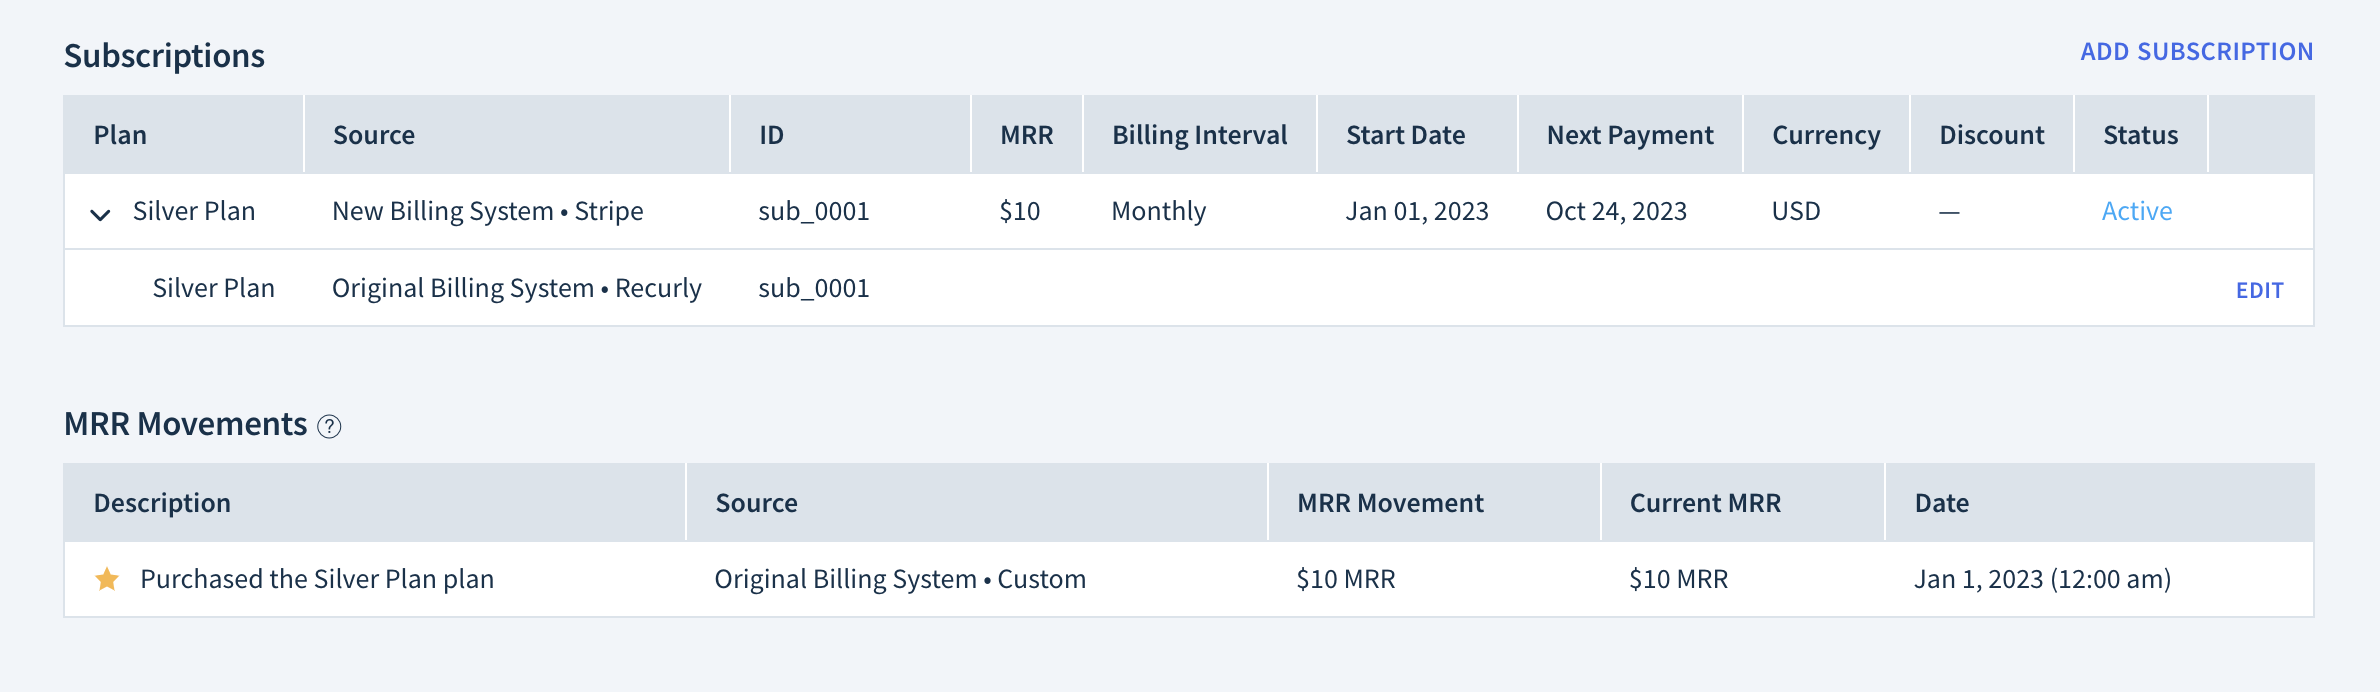 Screenshot of the Subscriptions section showing one merged subscription in the new billing system. The MRR Movements table below only contains information about purchasing one plan.